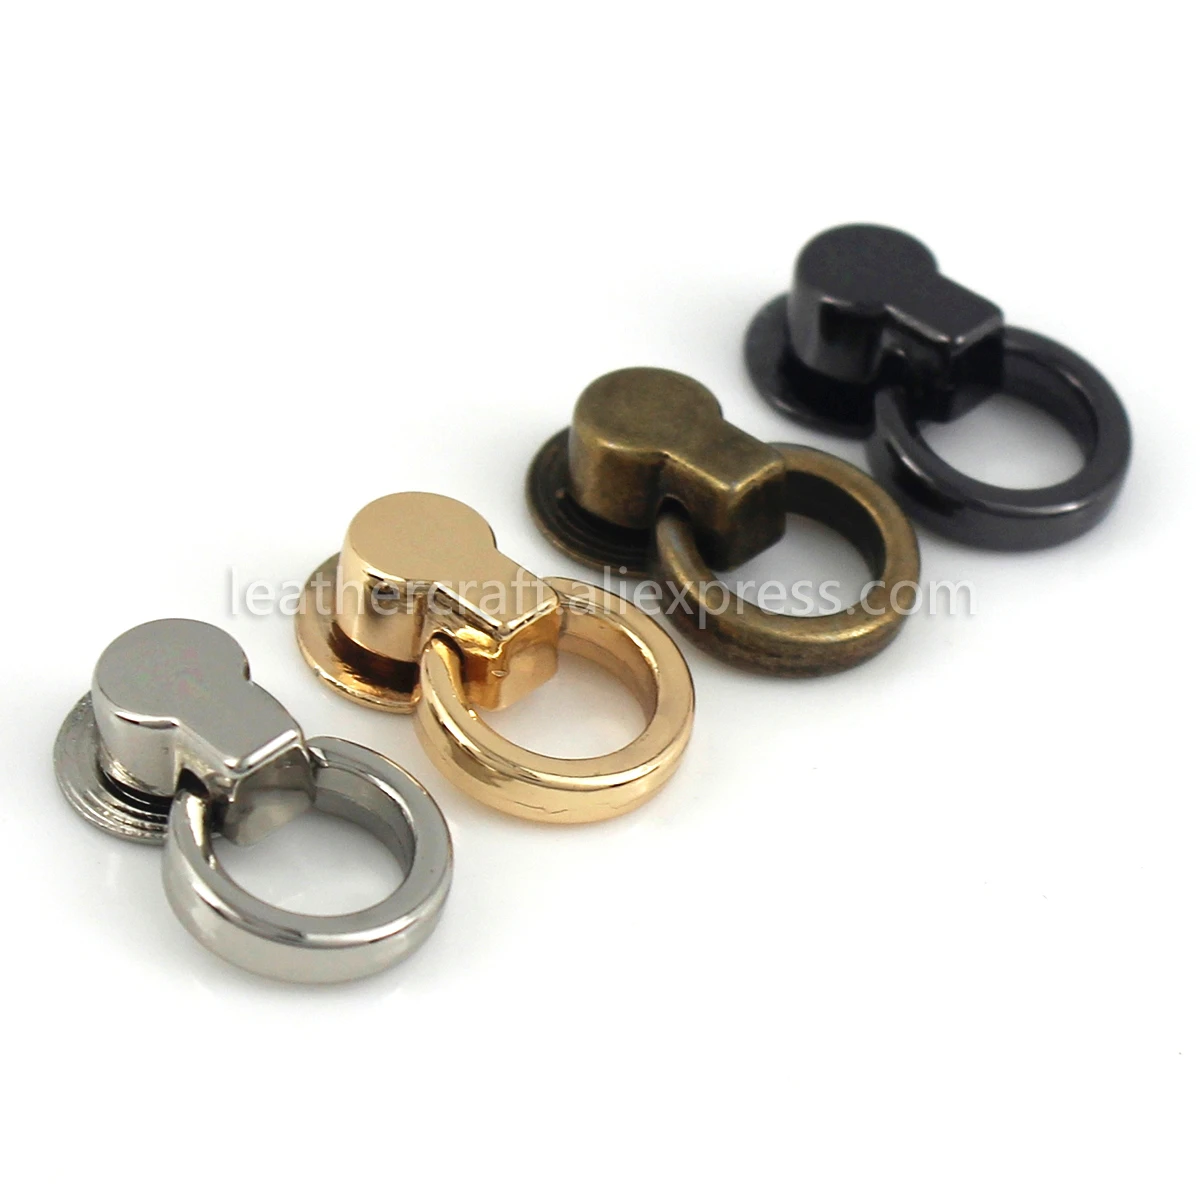 10pcs Metal Bag Side Tiny Anchor Gusset Hanger Clamps Bag Side Edge Anchor Link Hardware with O Rings for Tiny Bag Purse